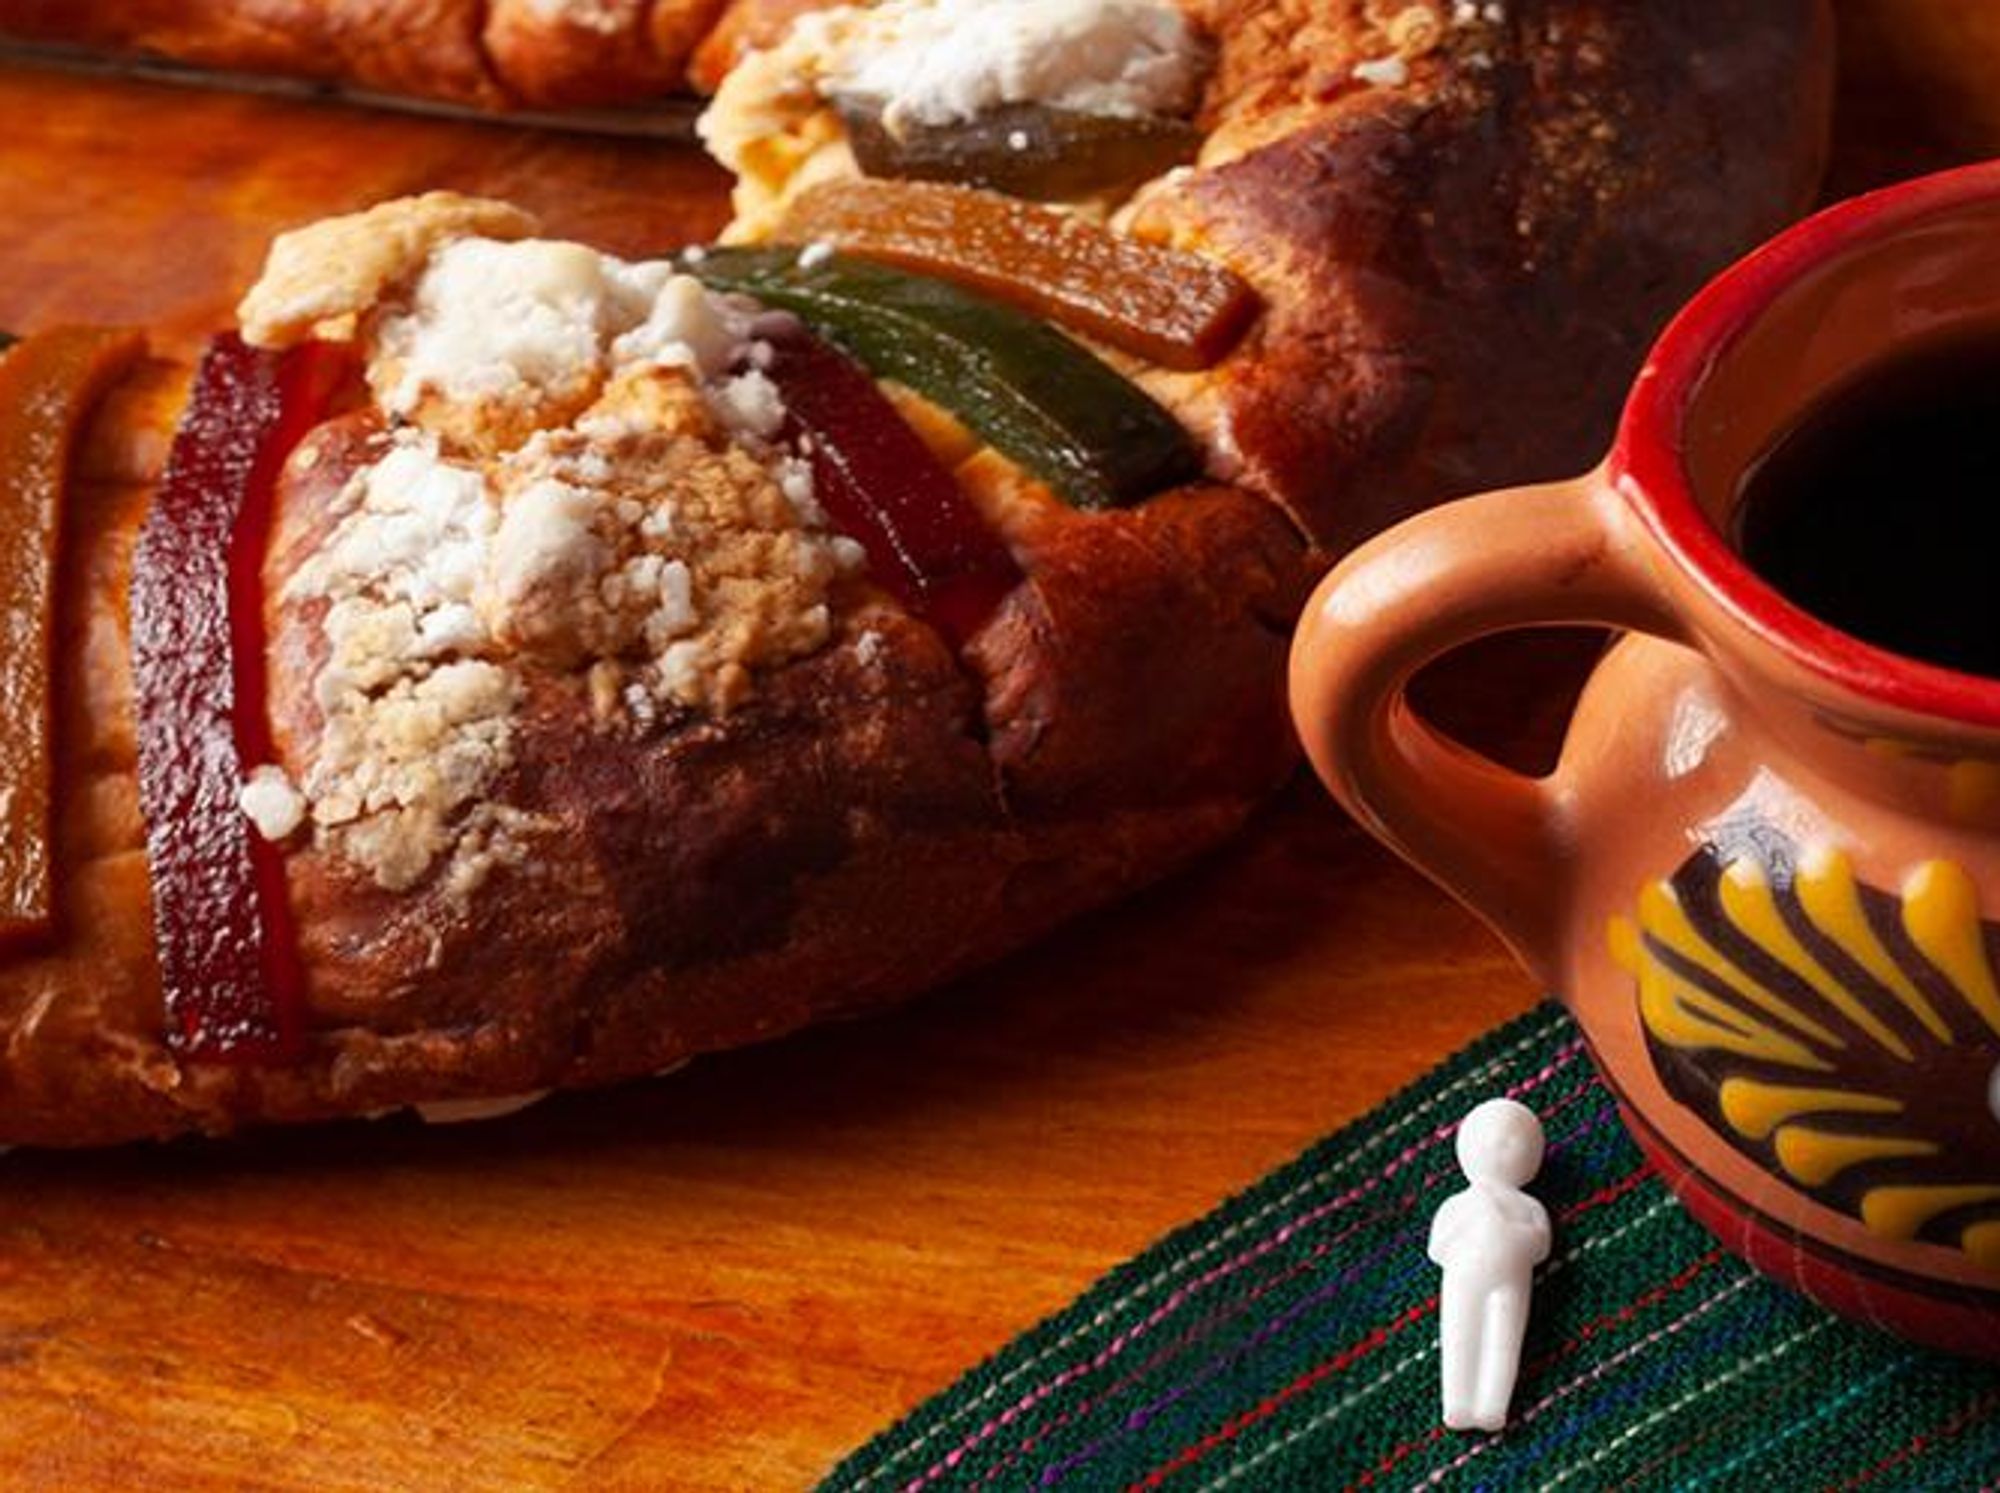 Latine Traditions: Los Reyes Magos, The Rosca and Tiny Baby Jesus